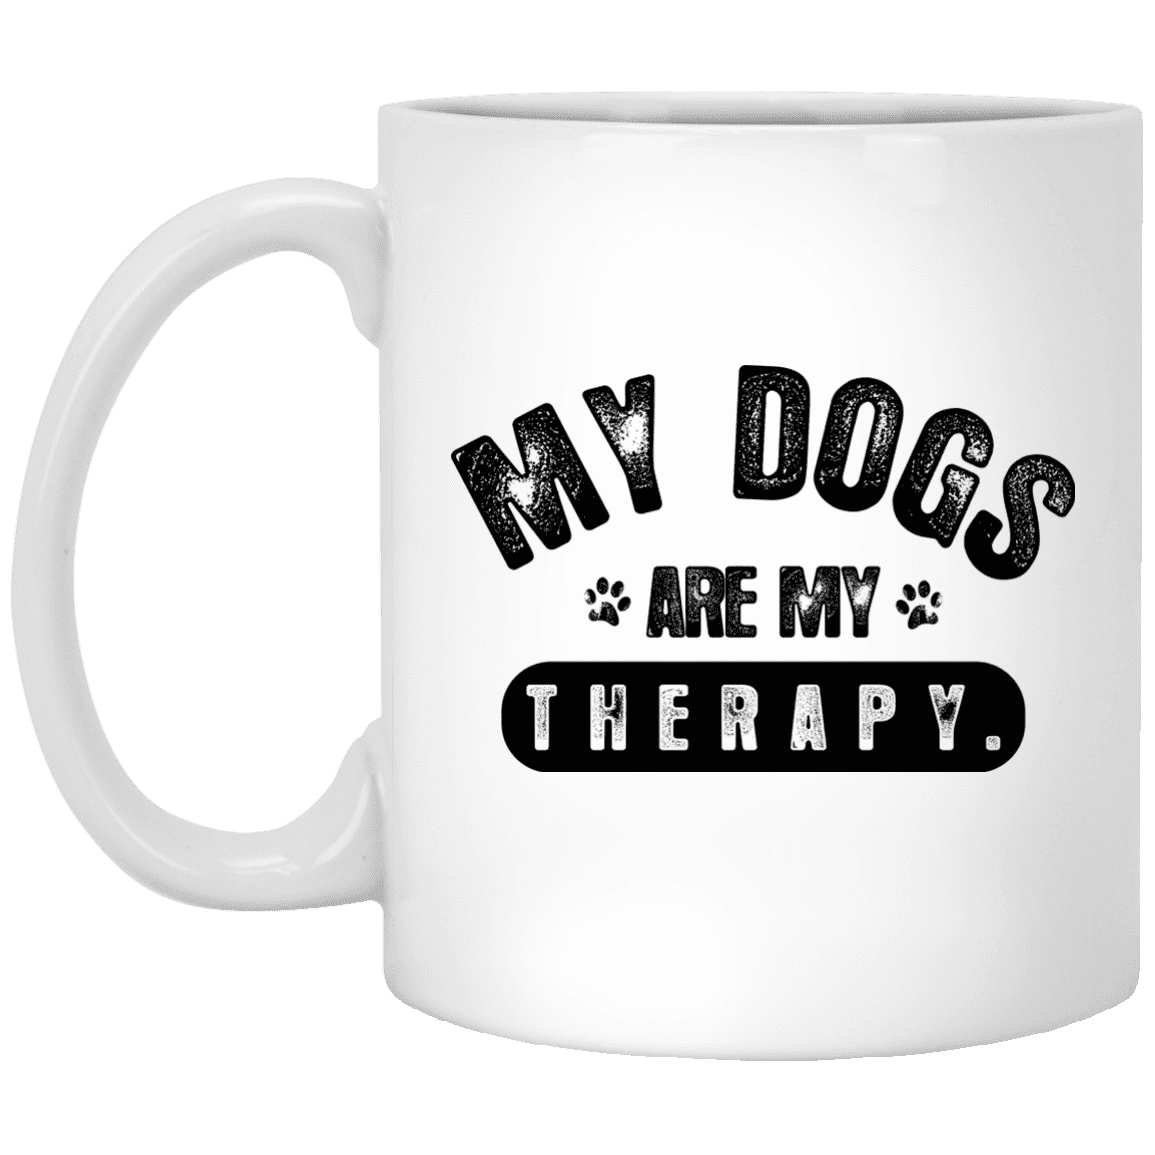 My Dogs Are My Therapy - Mugs.